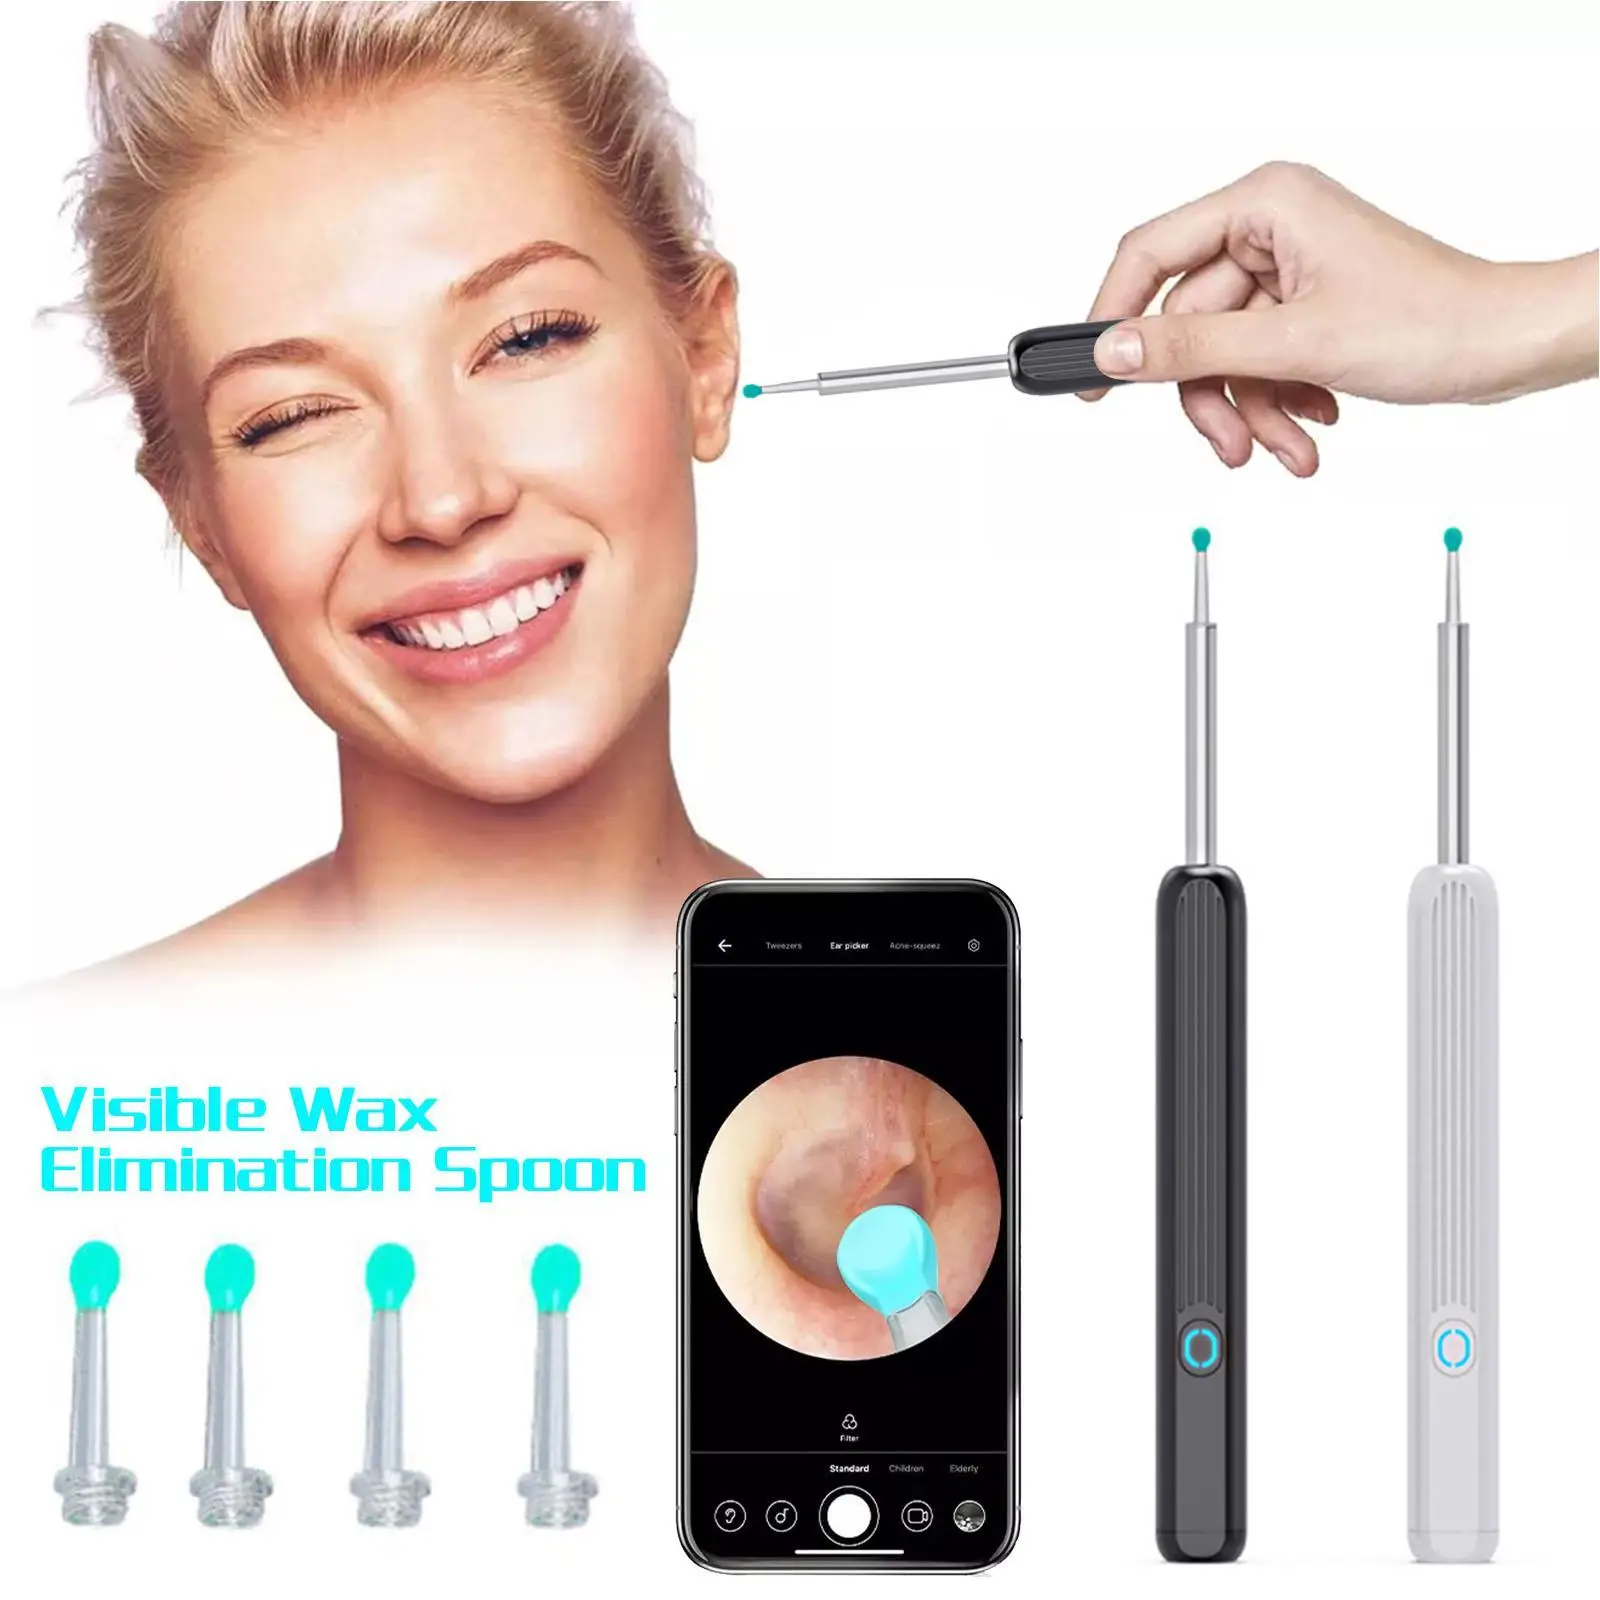 

Wi -Fi Visible Wax Elimination Spoon USB 1080P HD Load Otoscope Ear Cleaner Ear Wax Removal Tool Suitable for Android IOS Phones